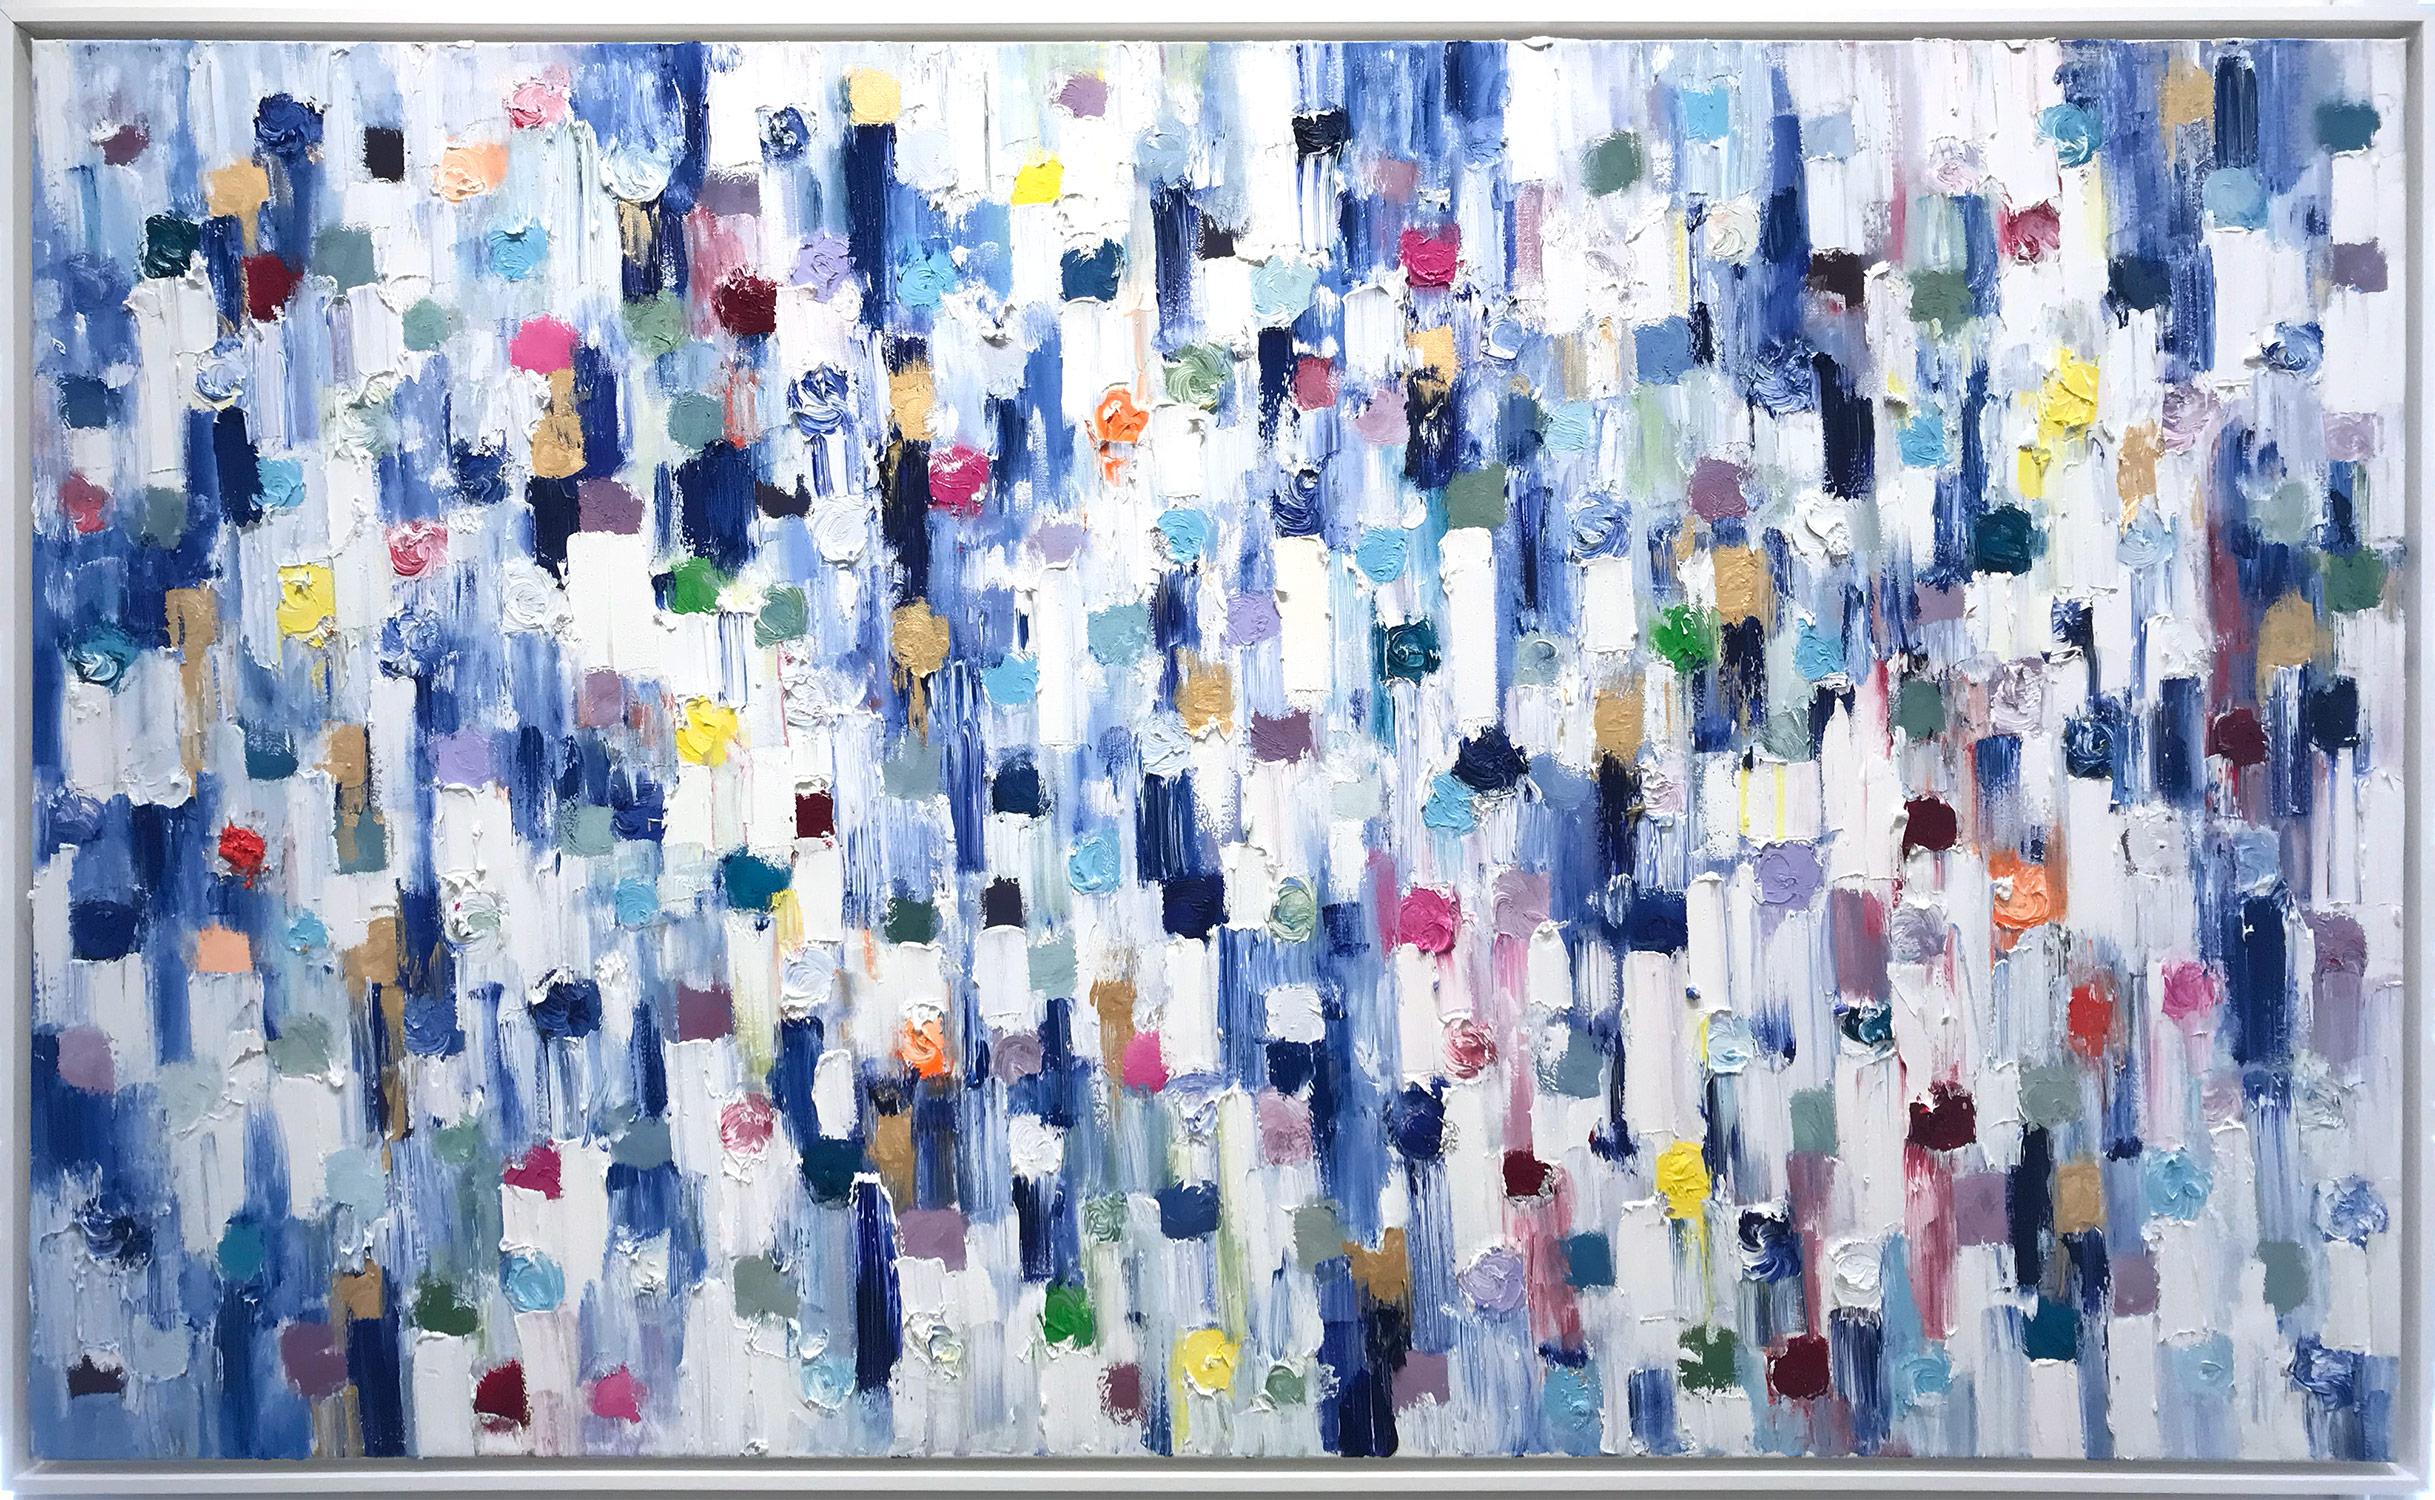 Cindy Shaoul Abstract Painting - "Dripping Dots - Cannes" Colorful Abstract Landscape Oil Painting on Canvas 